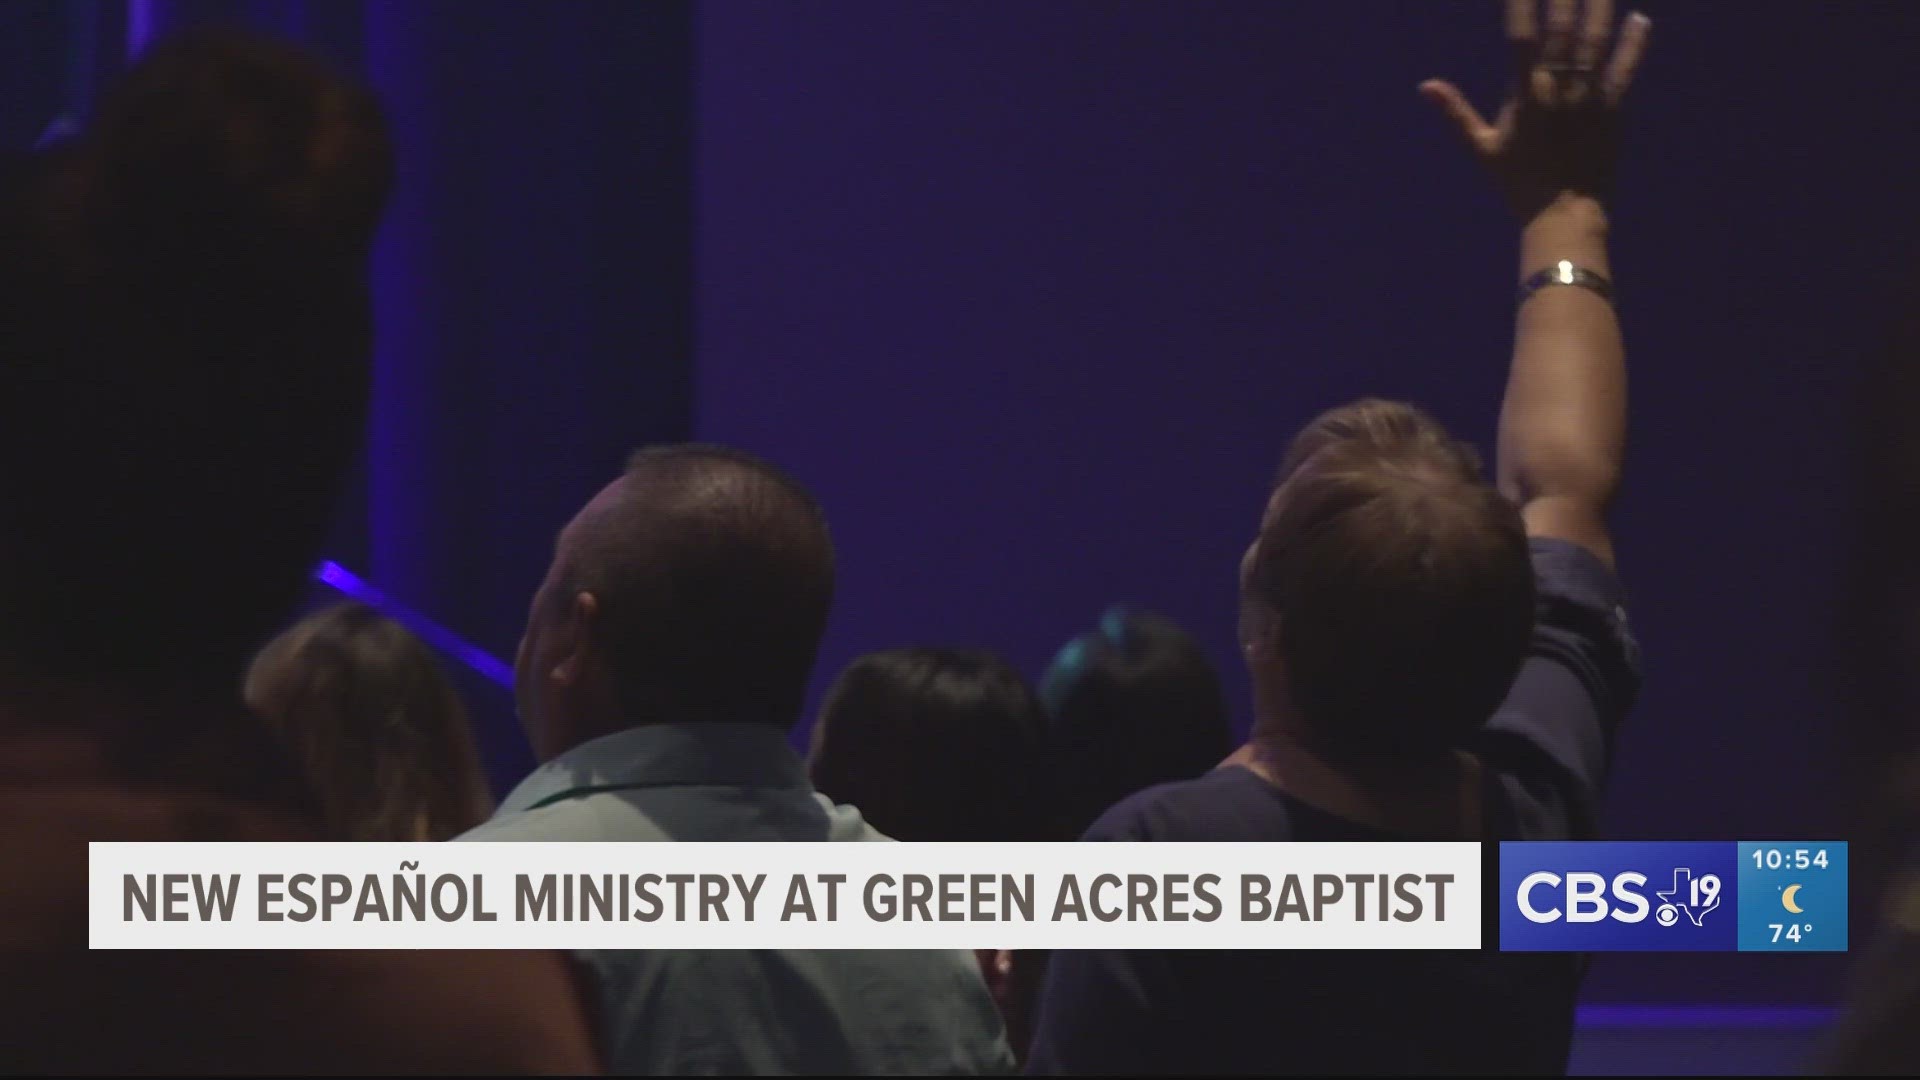 Green Acres Baptist Church celebrates beginning of Spanish ministry, services